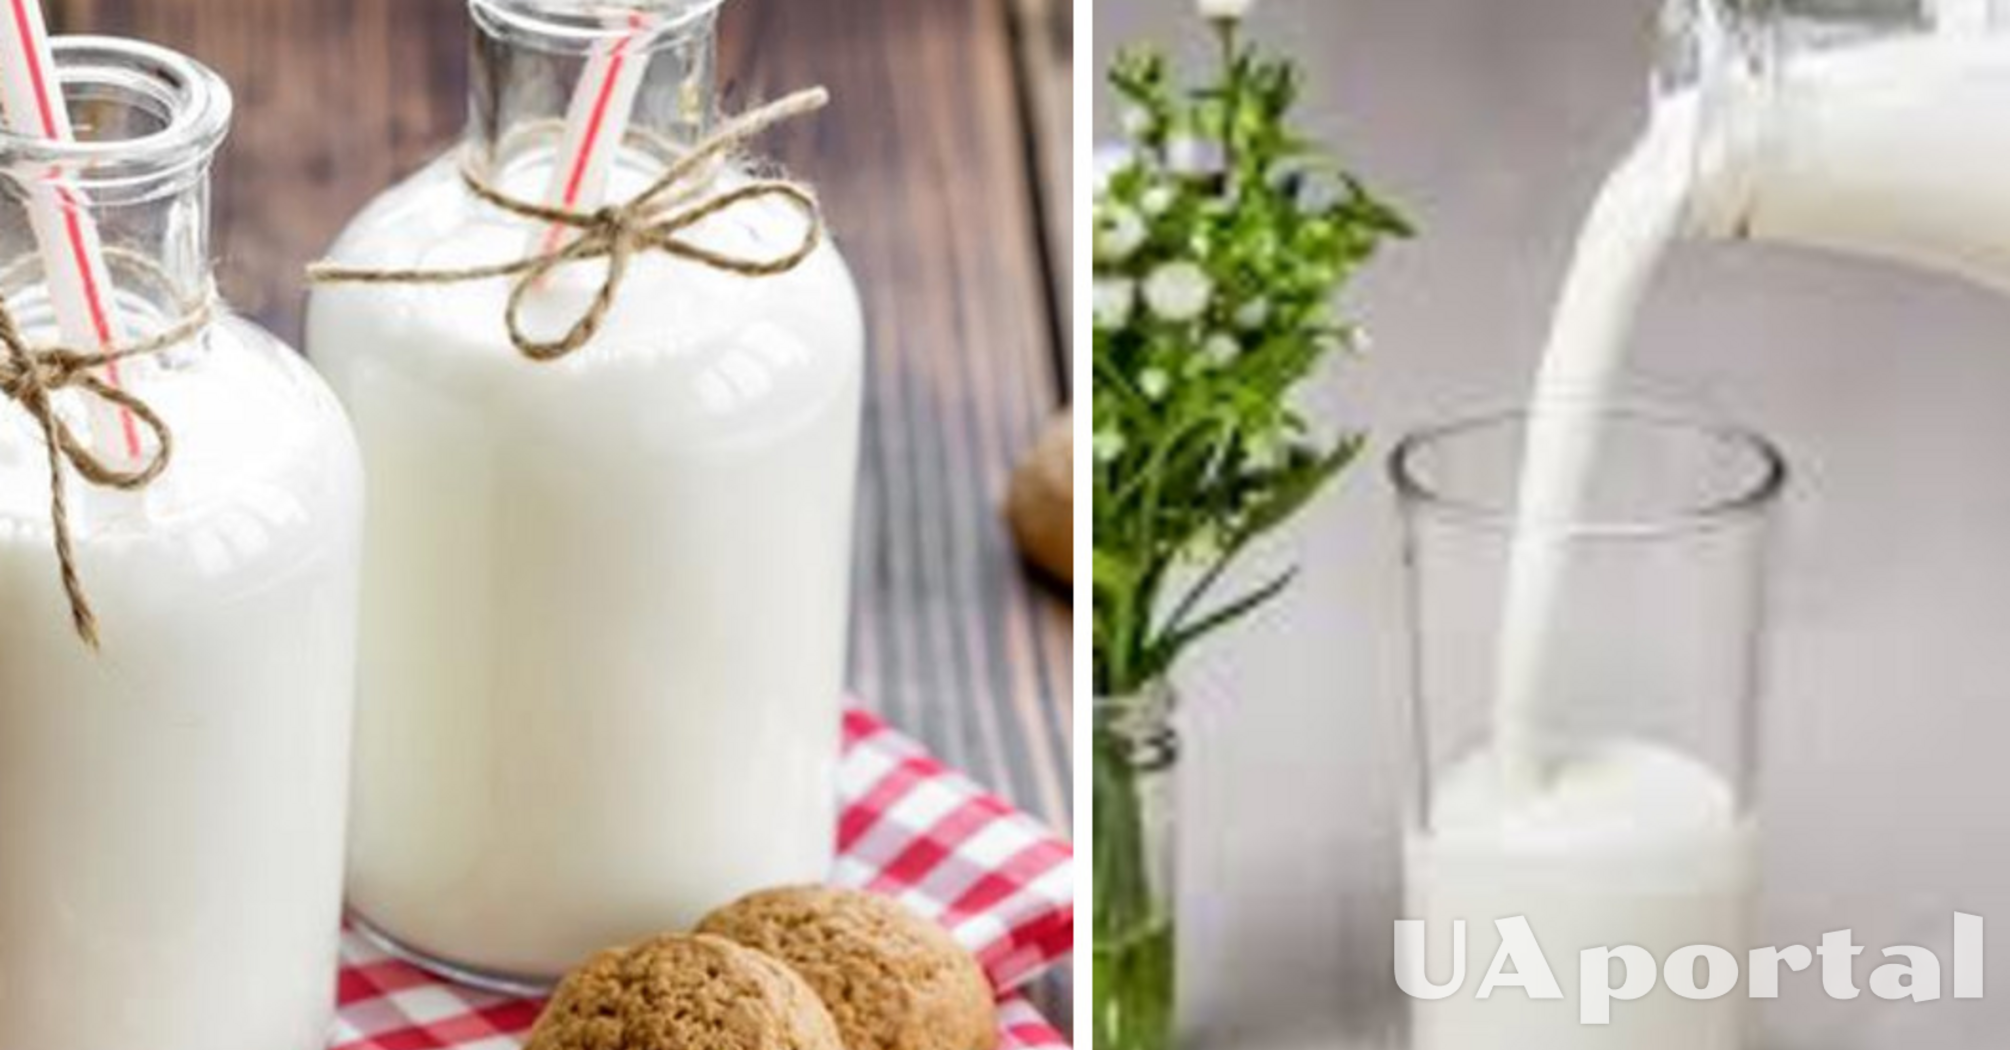 Who should not drink kefir and why: the answer will surprise you